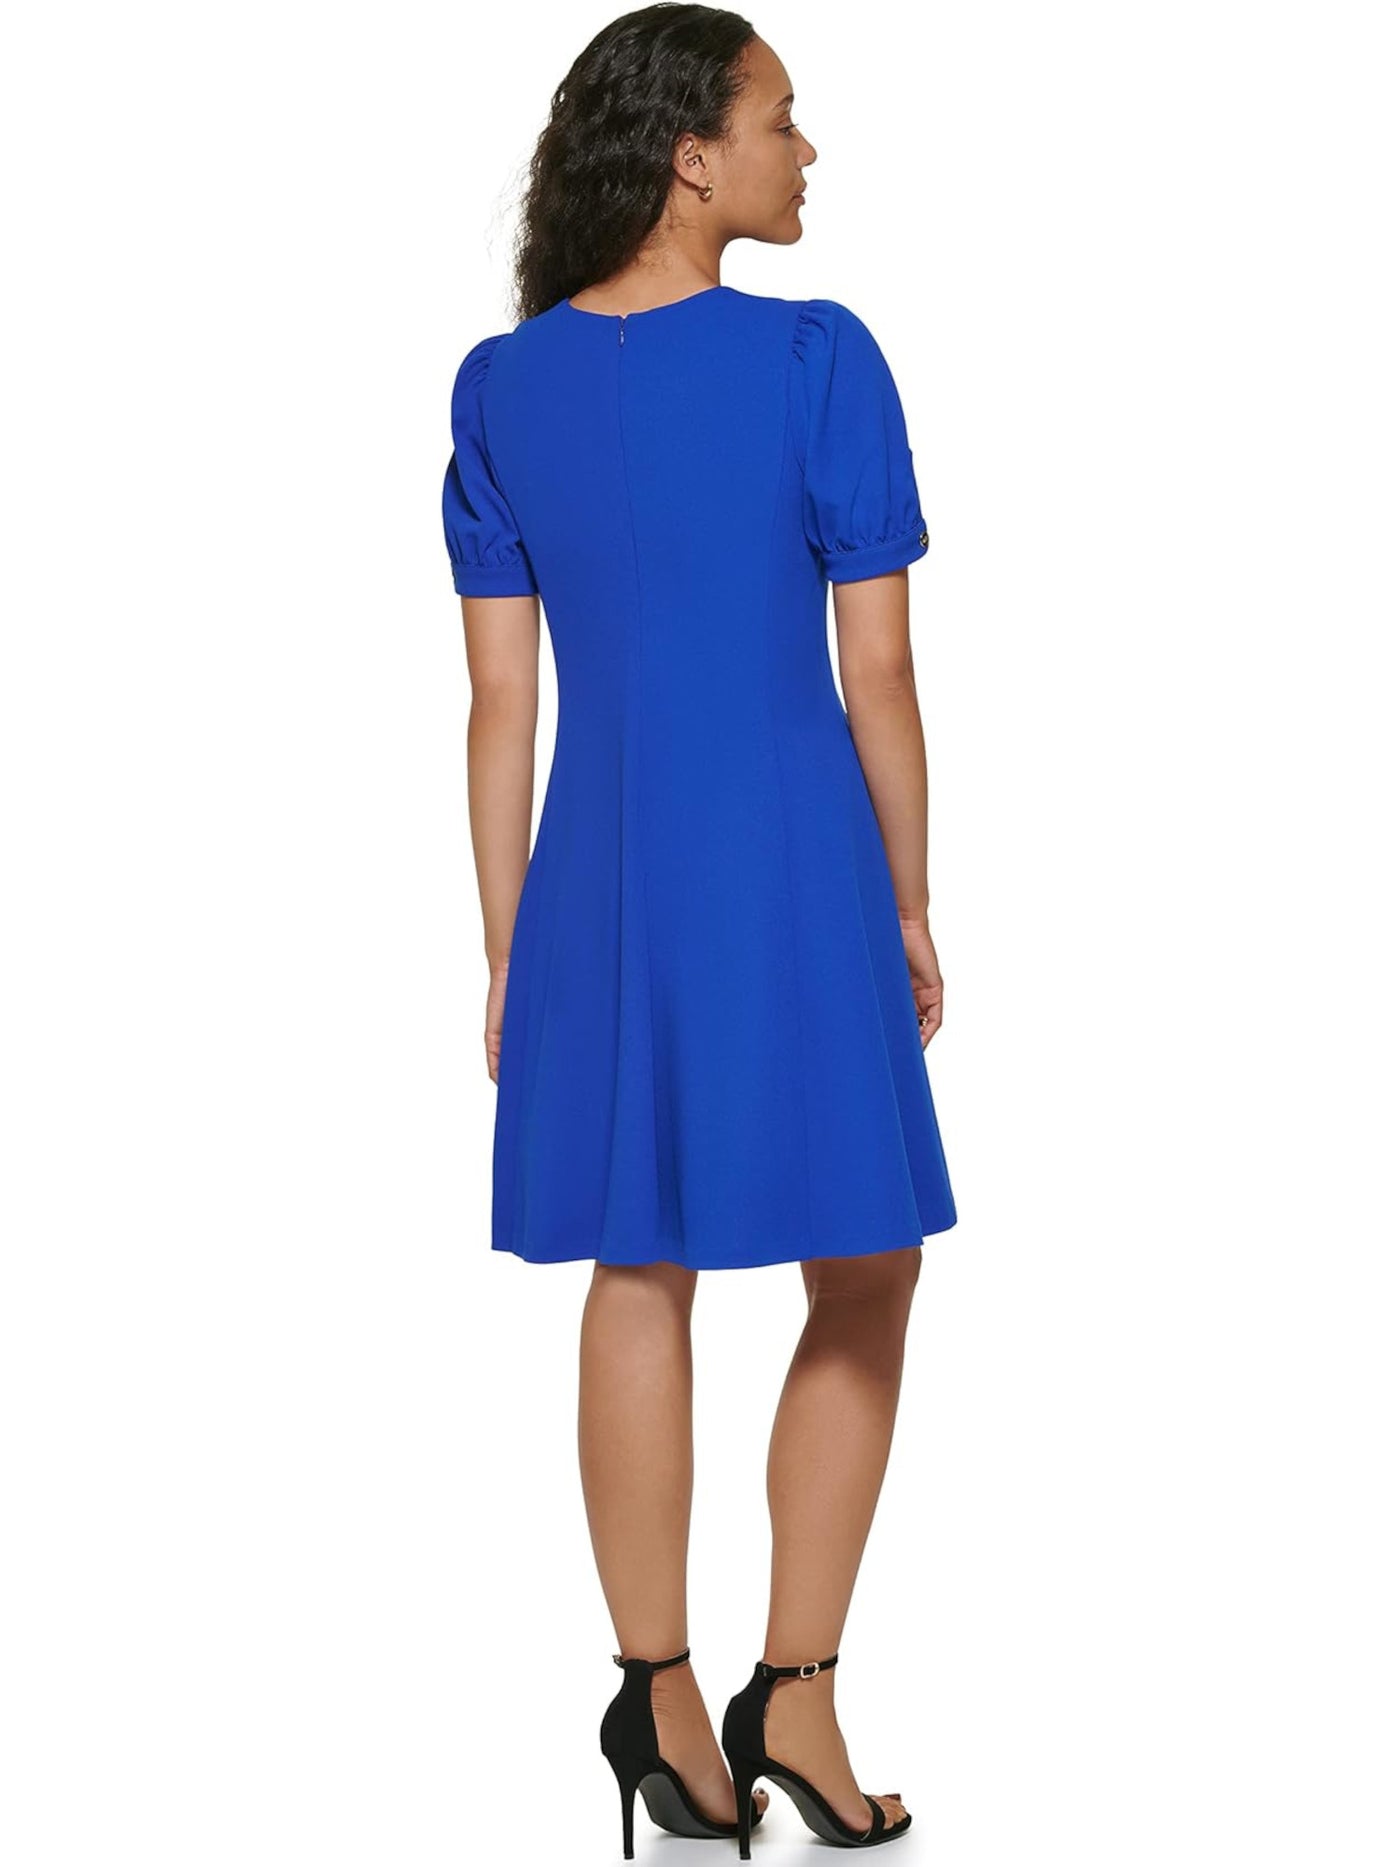 DKNY Womens Blue Zippered Button Trimmed Cuffs Short Sleeve Jewel Neck Above The Knee Wear To Work Fit + Flare Dress 10